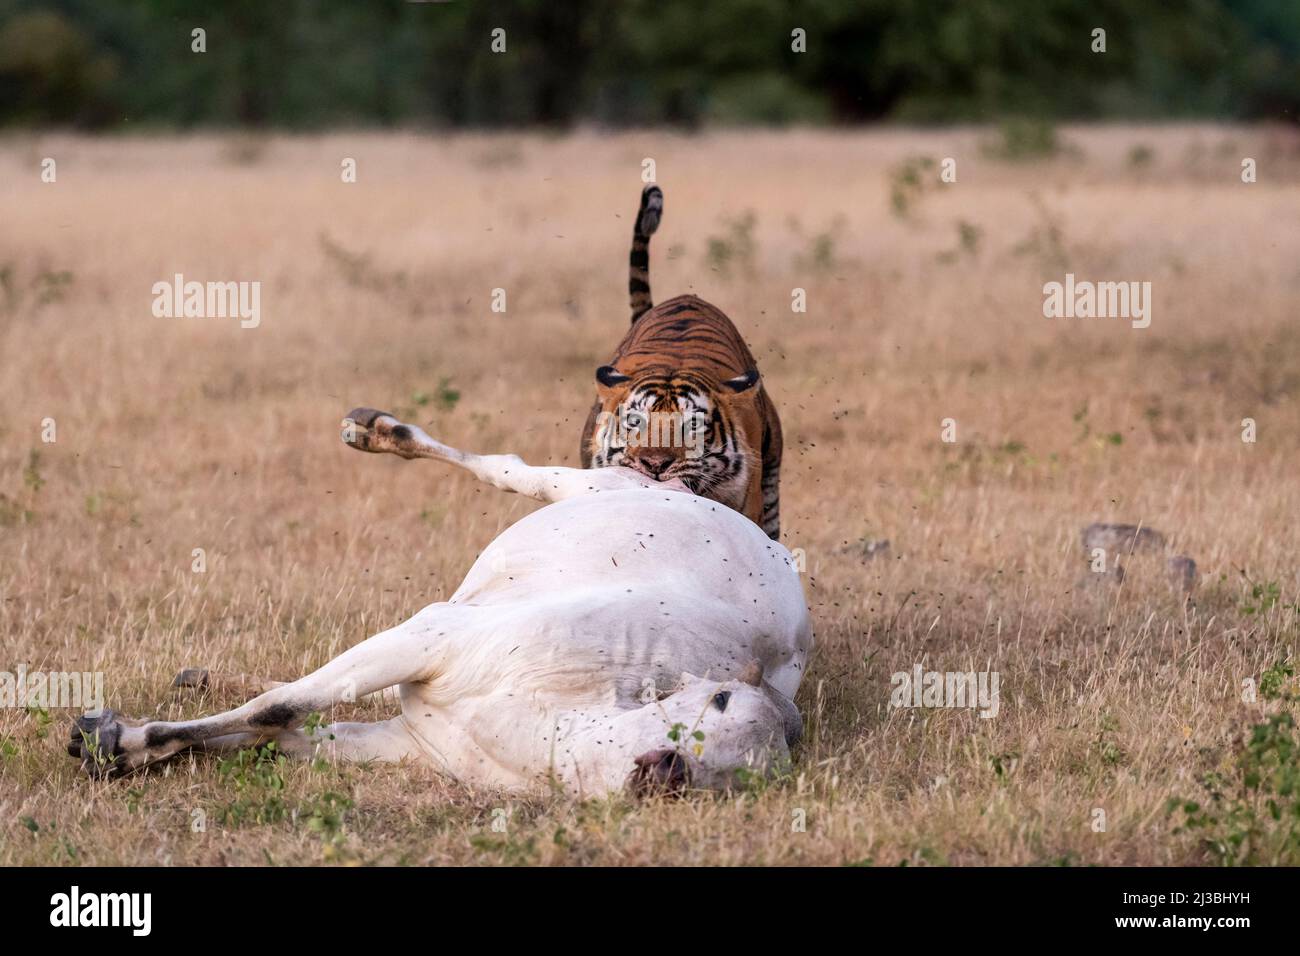 Wild male tiger with cattle or domestic cow kill. Real threat or serious conservation  issue where tiger kill stray or poisonous animals national park Stock Photo  - Alamy